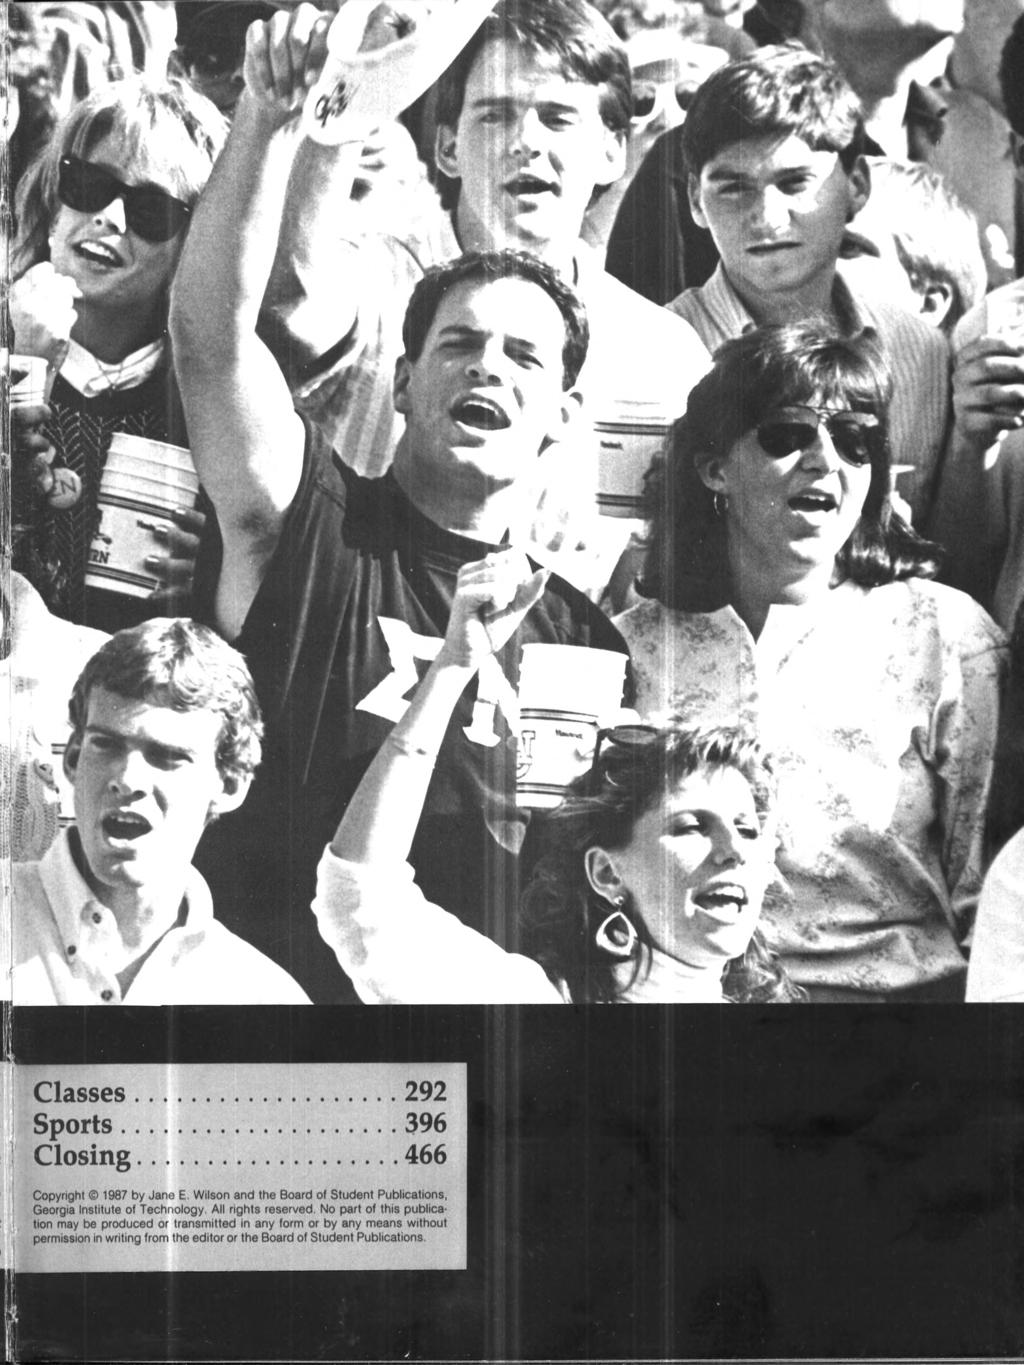 Classes 292 Sports 396 Closing 466 Copyright 1987 by Jane E. Wilson and the Board of Student Publications, Georgia Institute of Technology. All rights reserved.